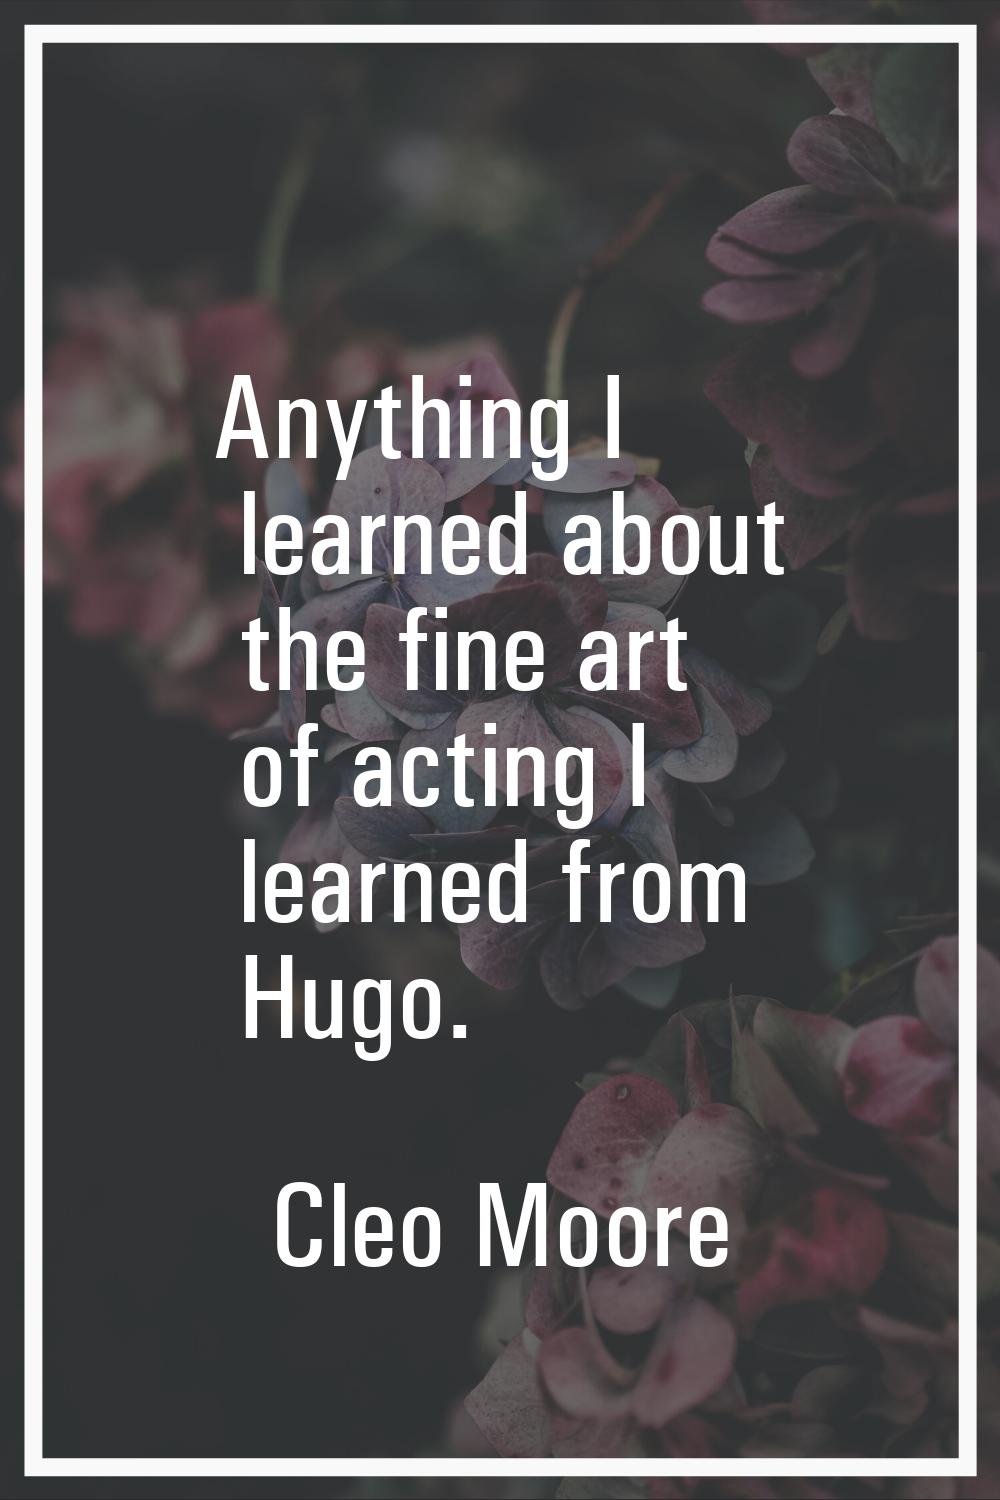 Anything I learned about the fine art of acting I learned from Hugo.